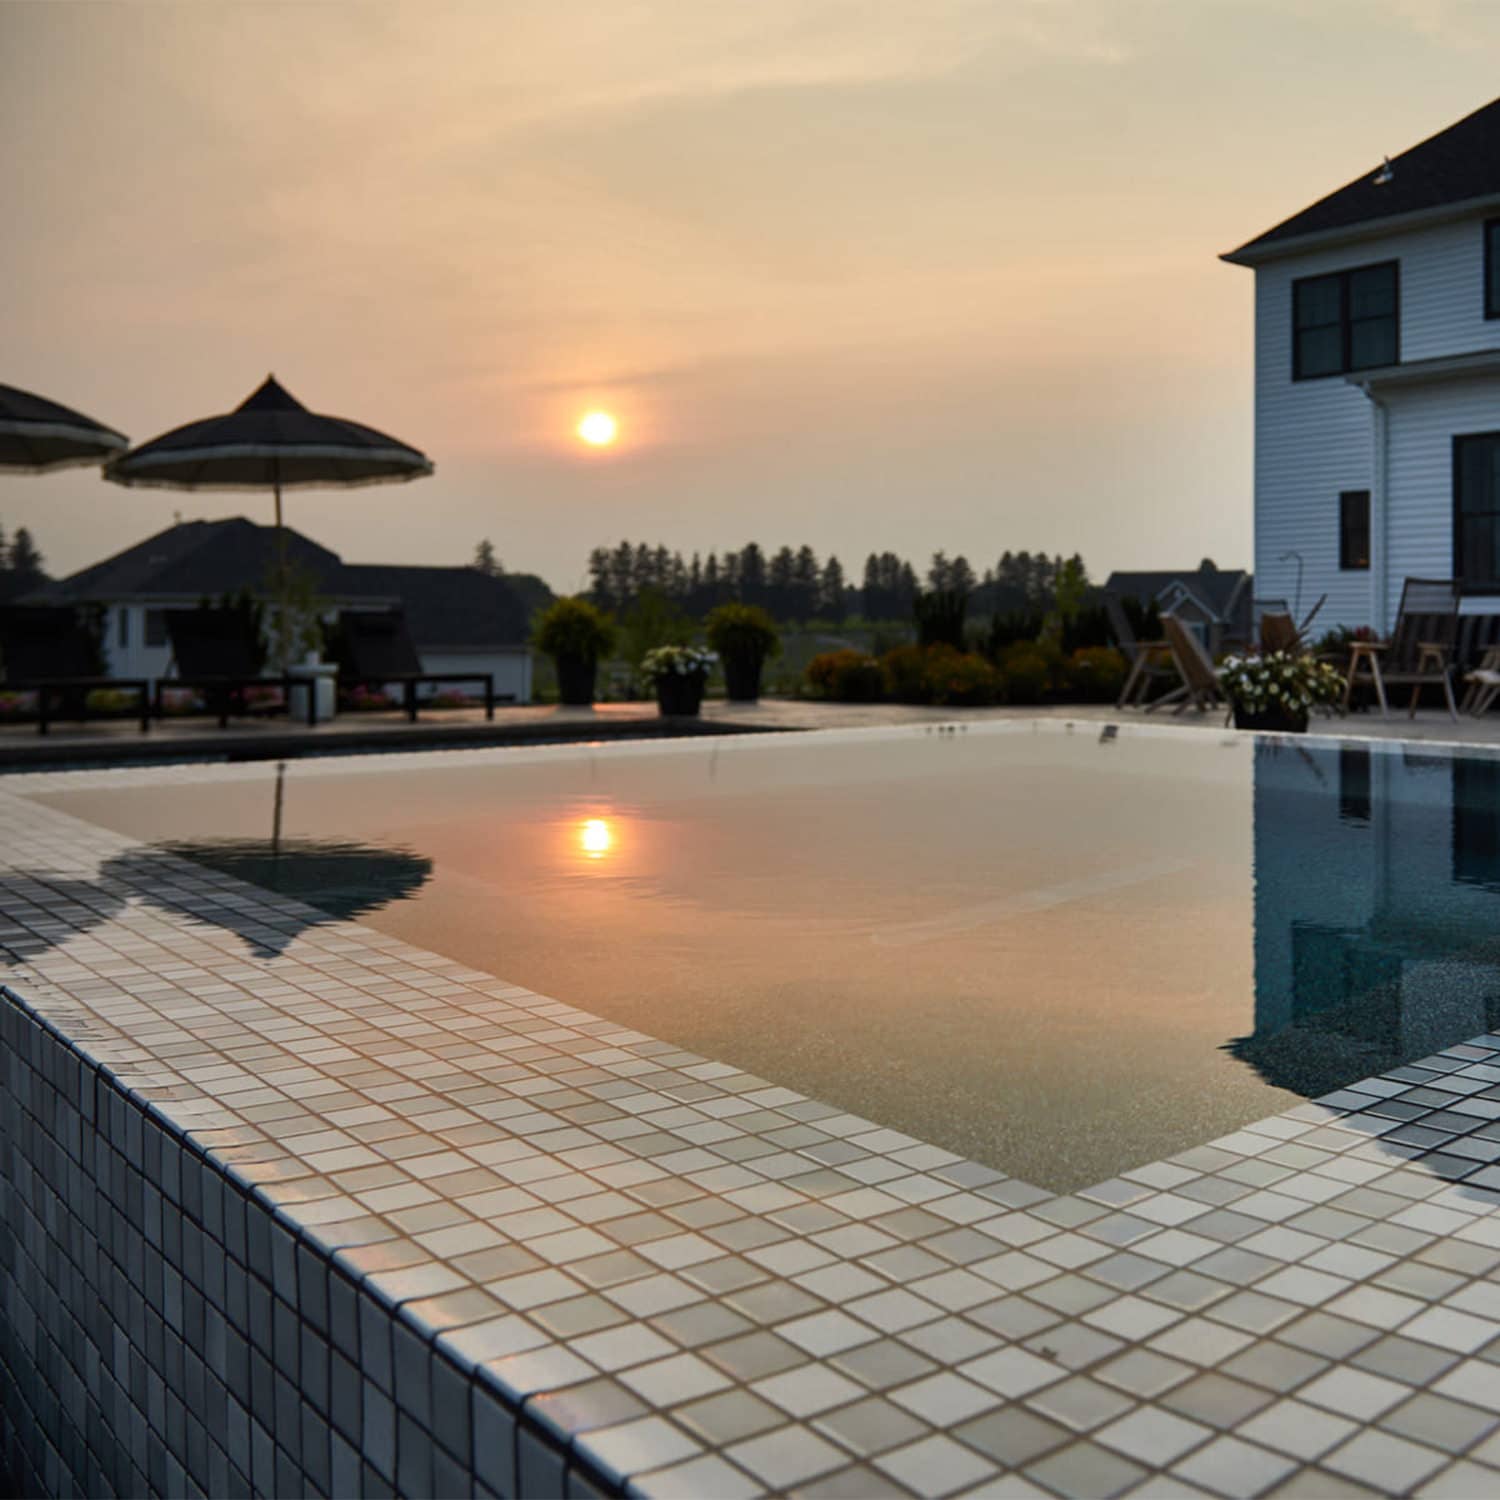 The way the sunset reflects off this custom overflow spa makes the water look like a sheet of glass! Perfection.